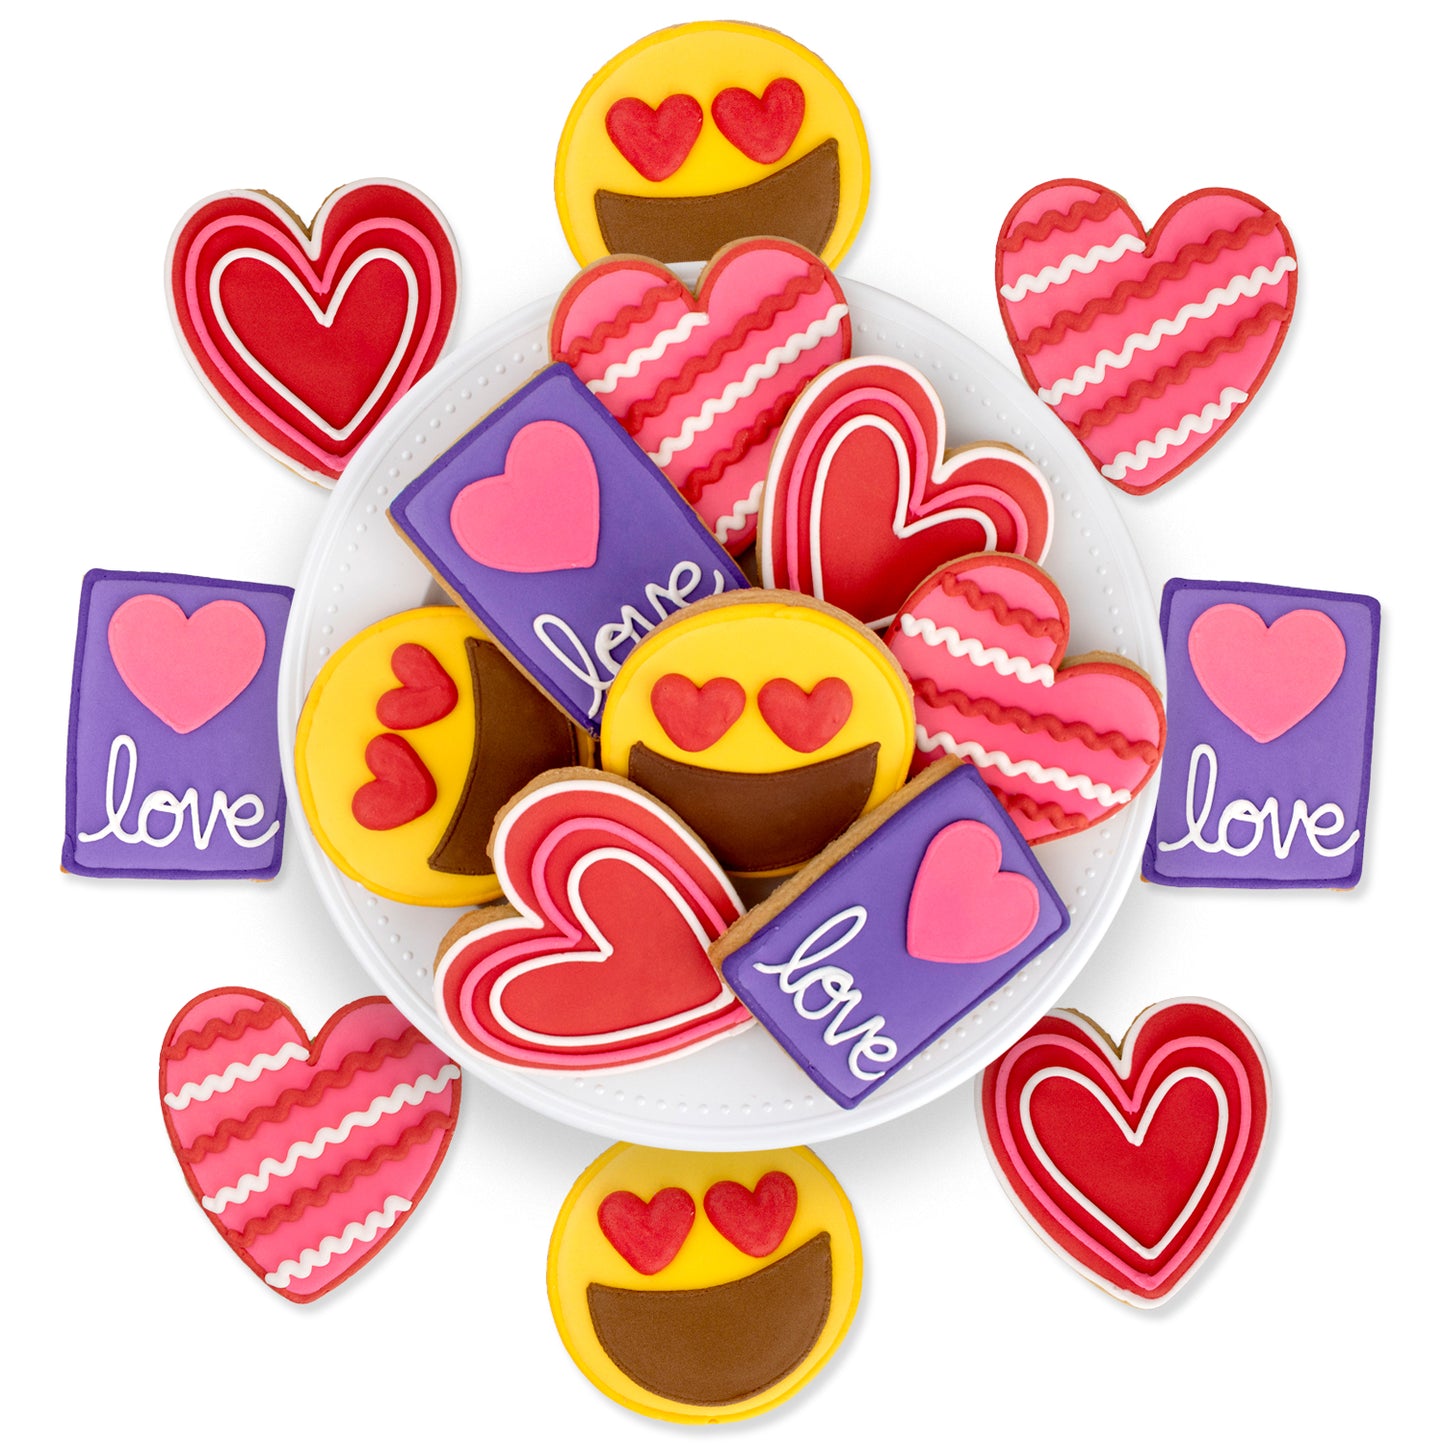 Valentine's Day Hand-Decorated Cookies - 16 ct